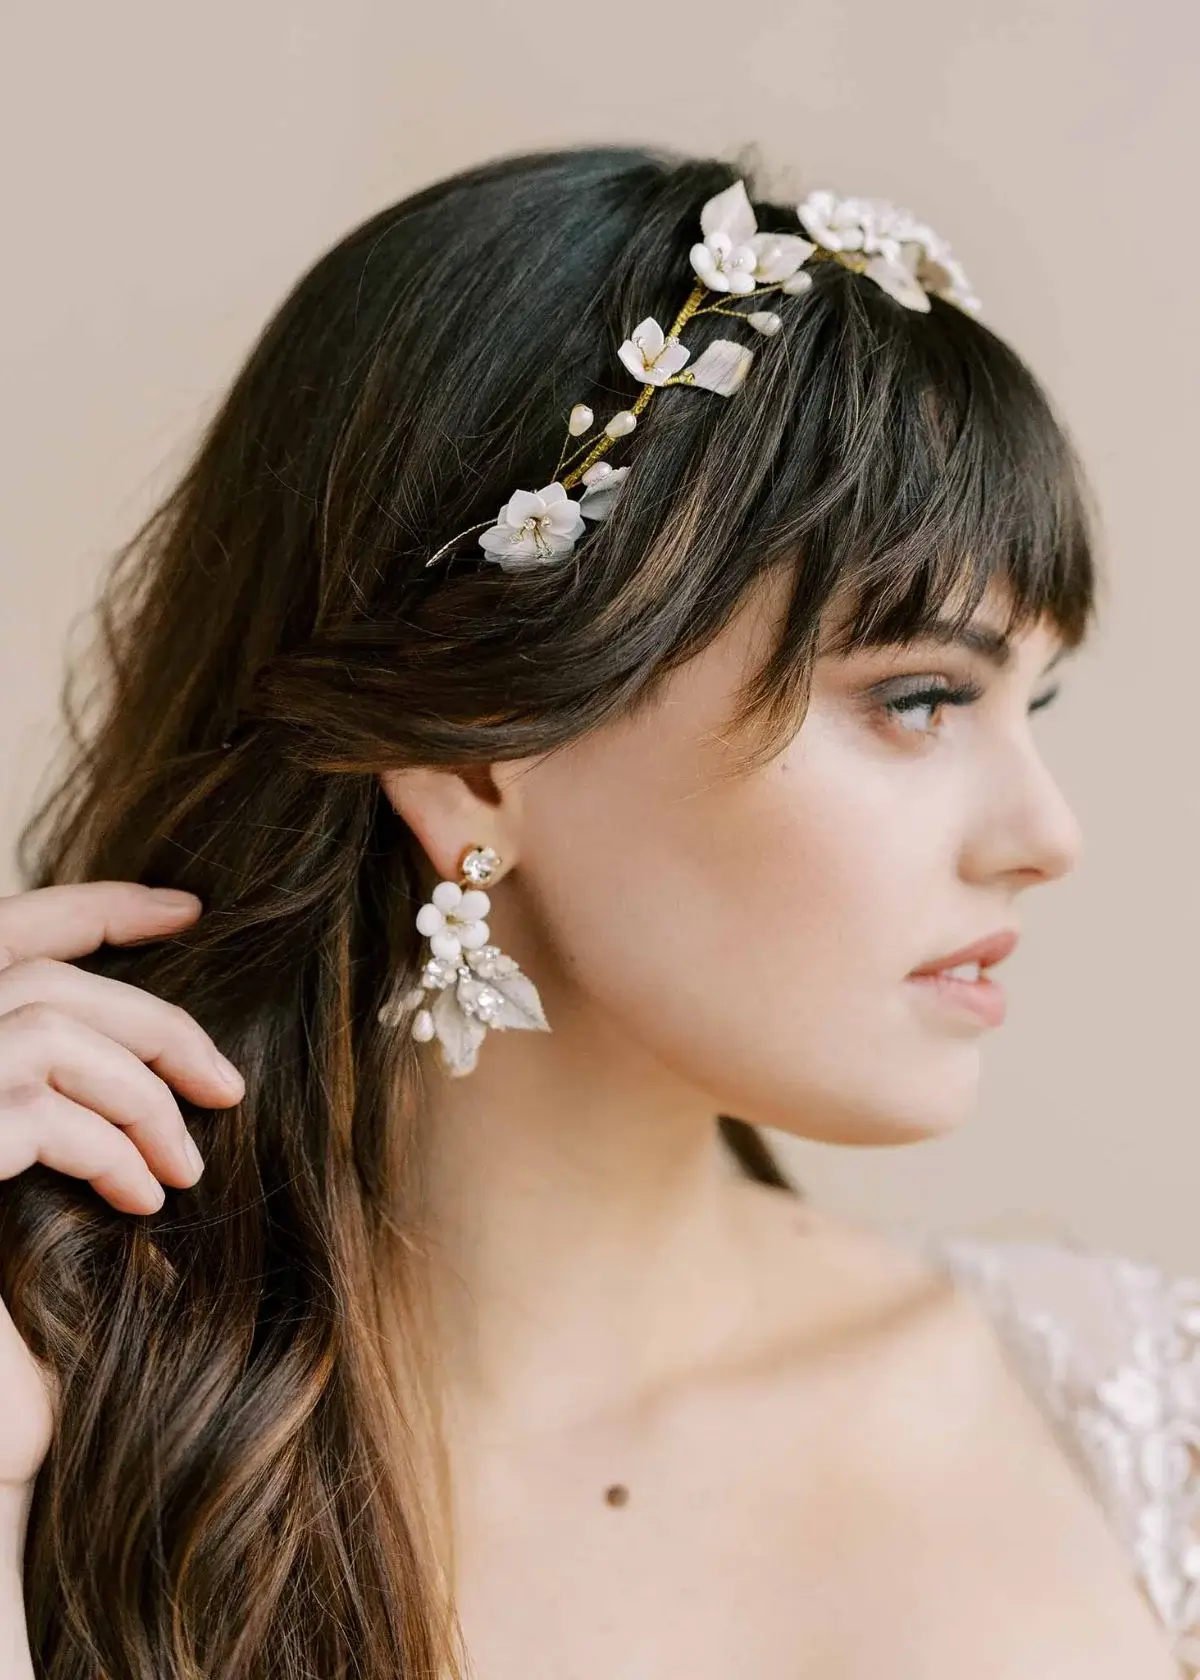 How to Choose the Right Cherry Blossom Earrings?